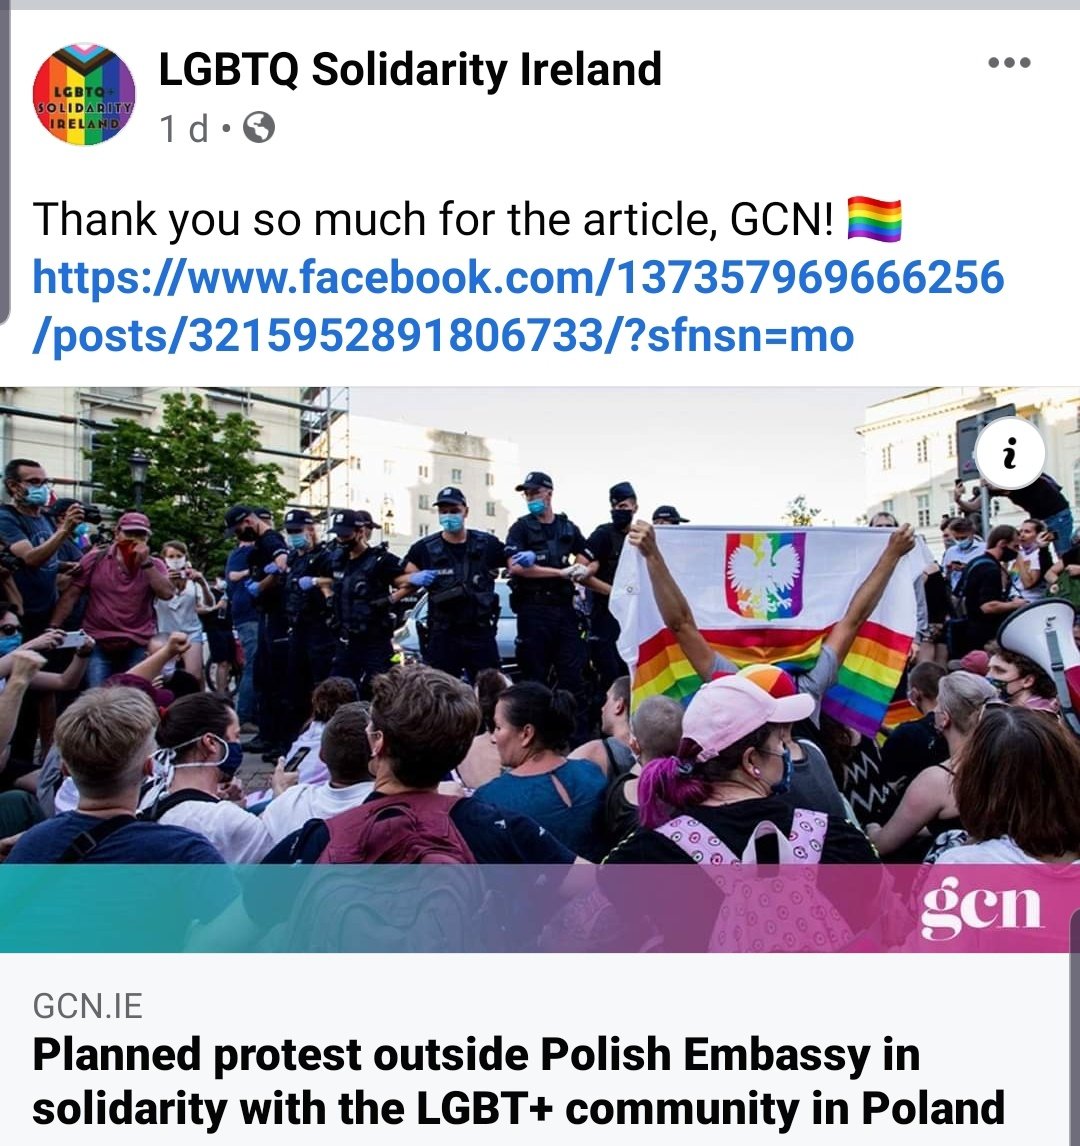 No sooner had Mijatovic's tweet gone out in August than Astro Turf Irish groups were out to organise intimidation at the Polish Embassy, with support from Fianna Fail, Sinn Fein and the Green Party